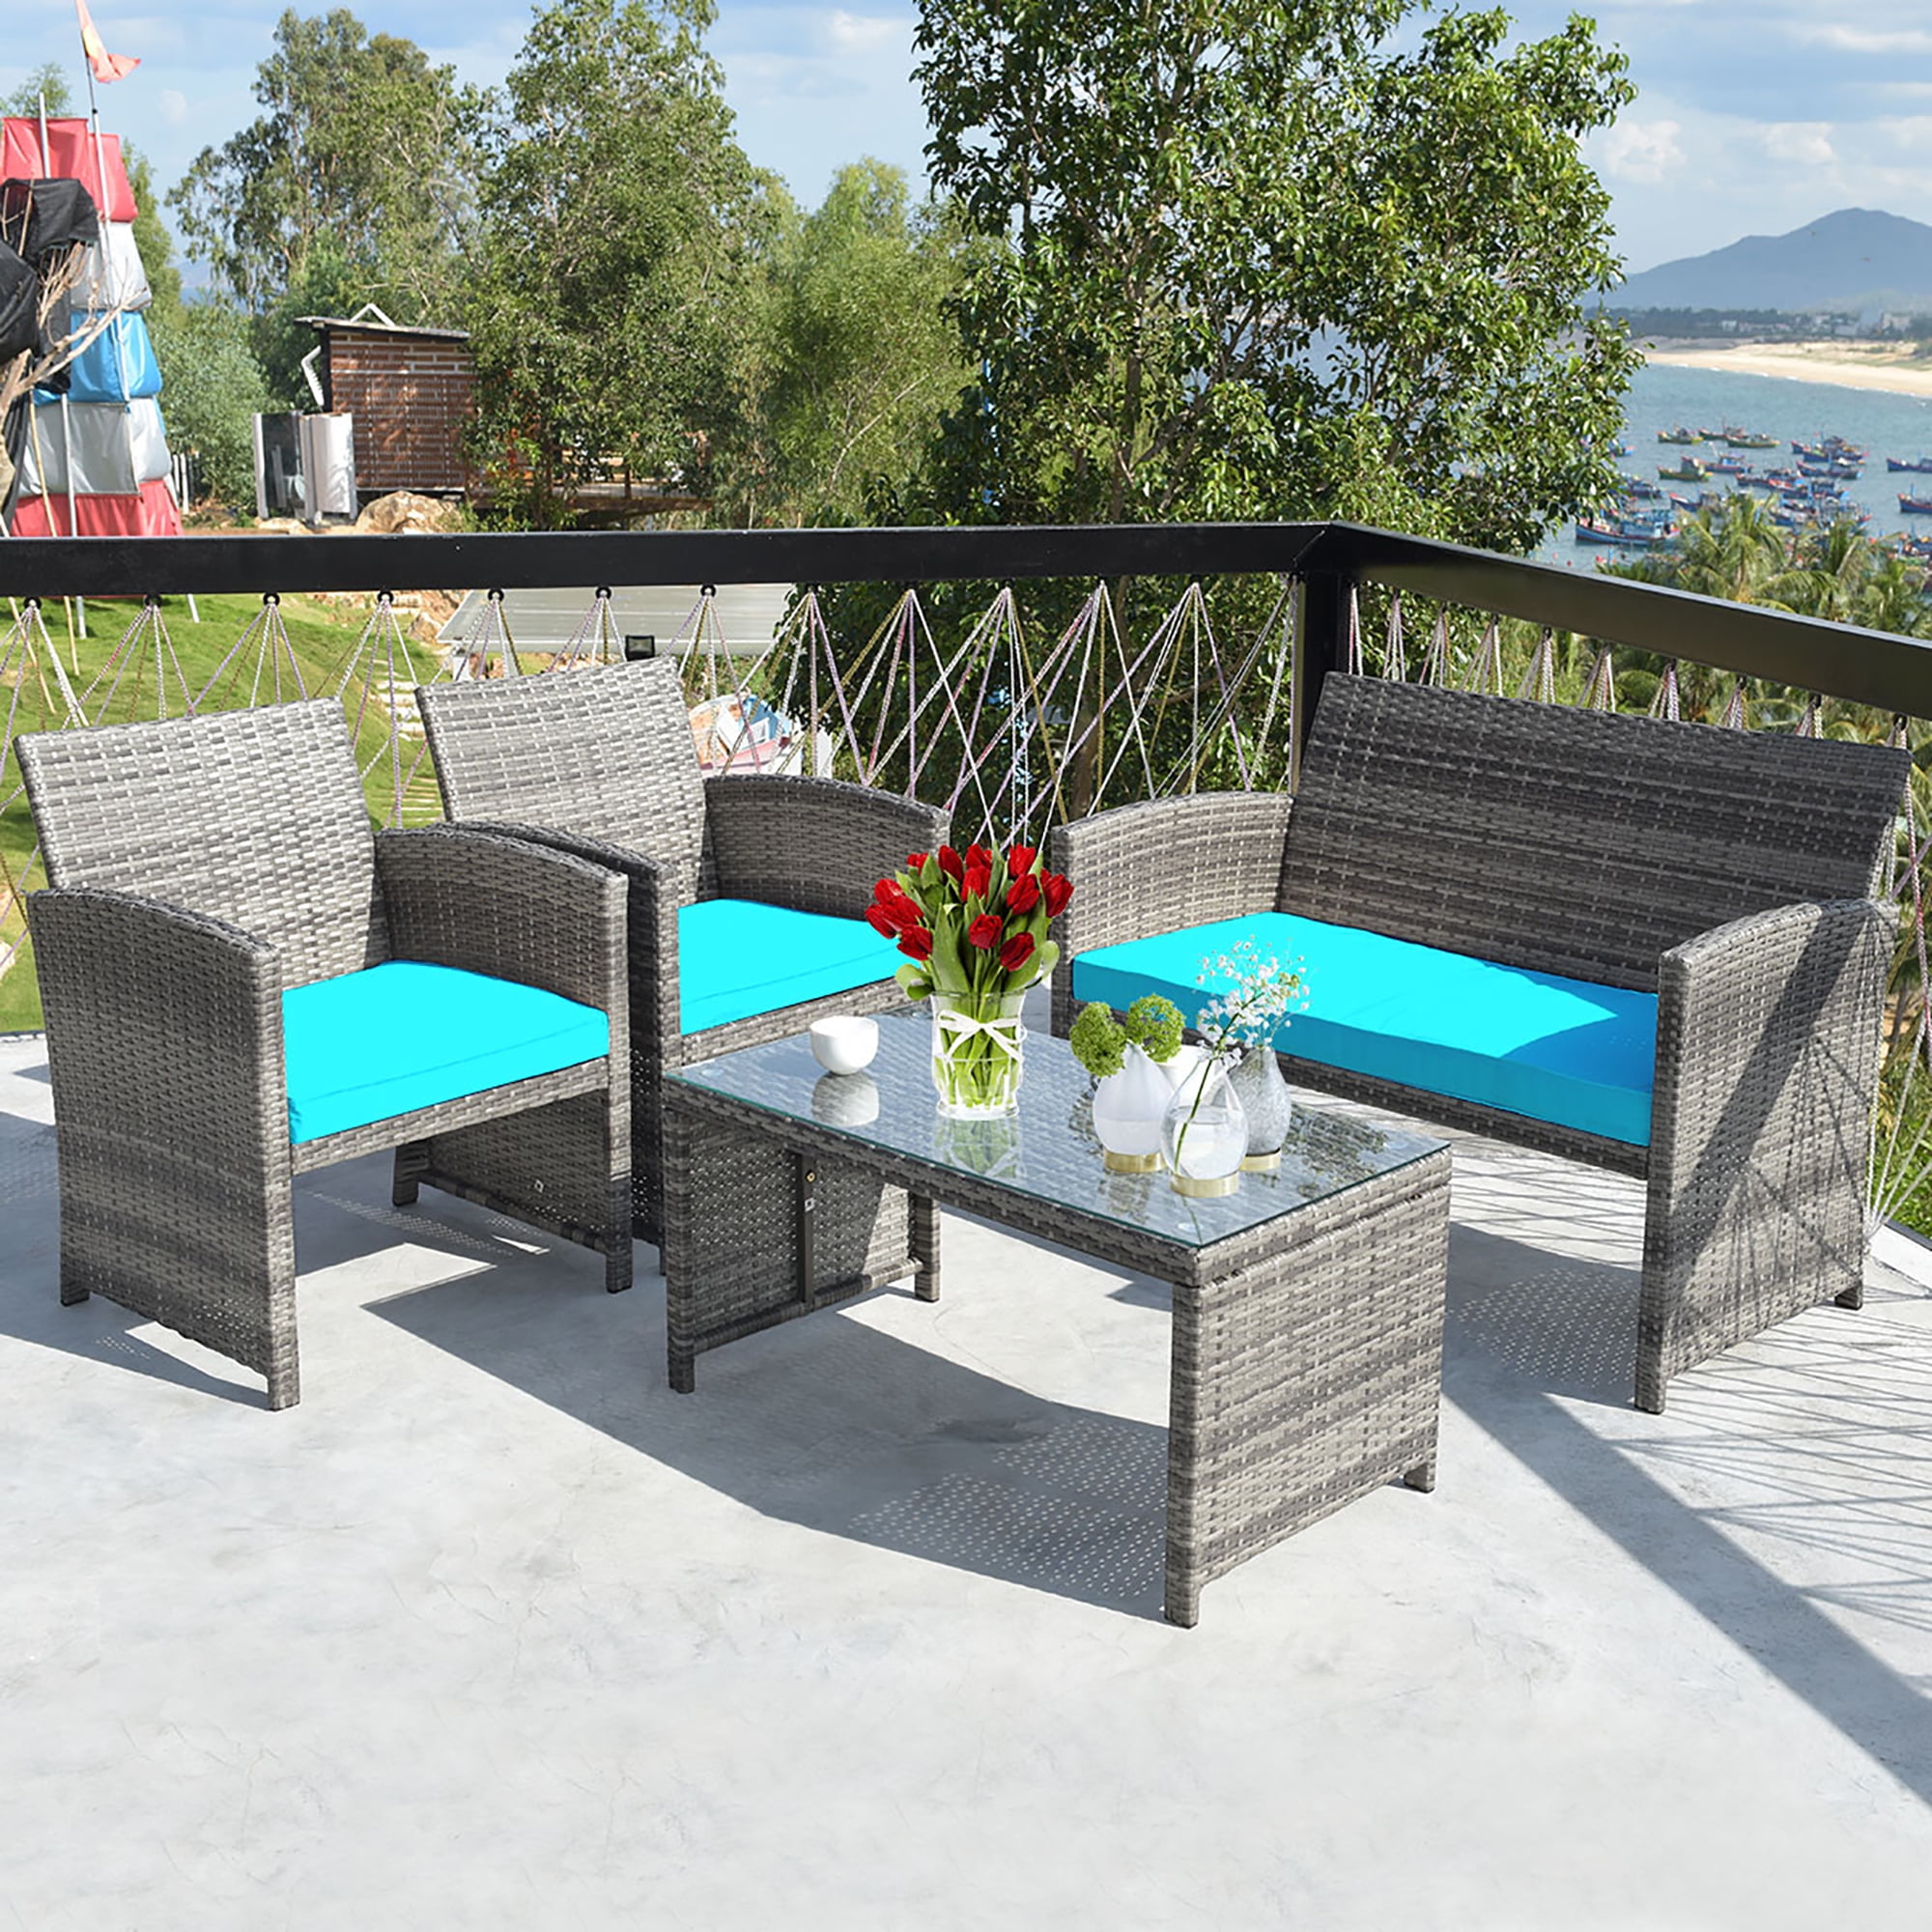 Costway 4 Pieces Patio Rattan Furniture, Turquoise Wicker Outdoor Furniture